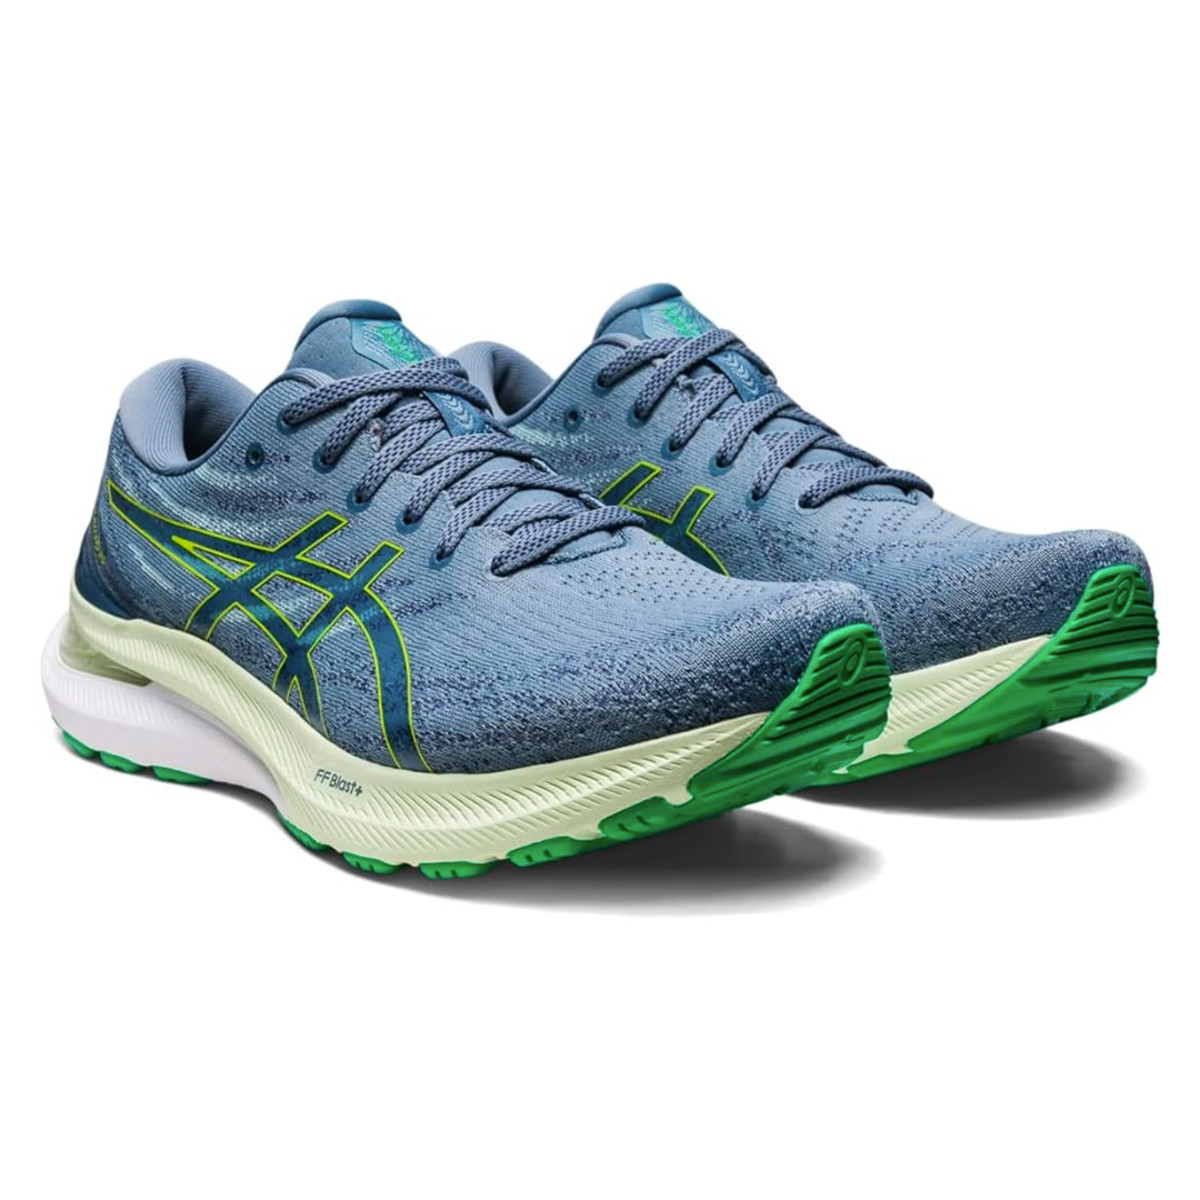 Asics hi-res stock photography and images - Alamy